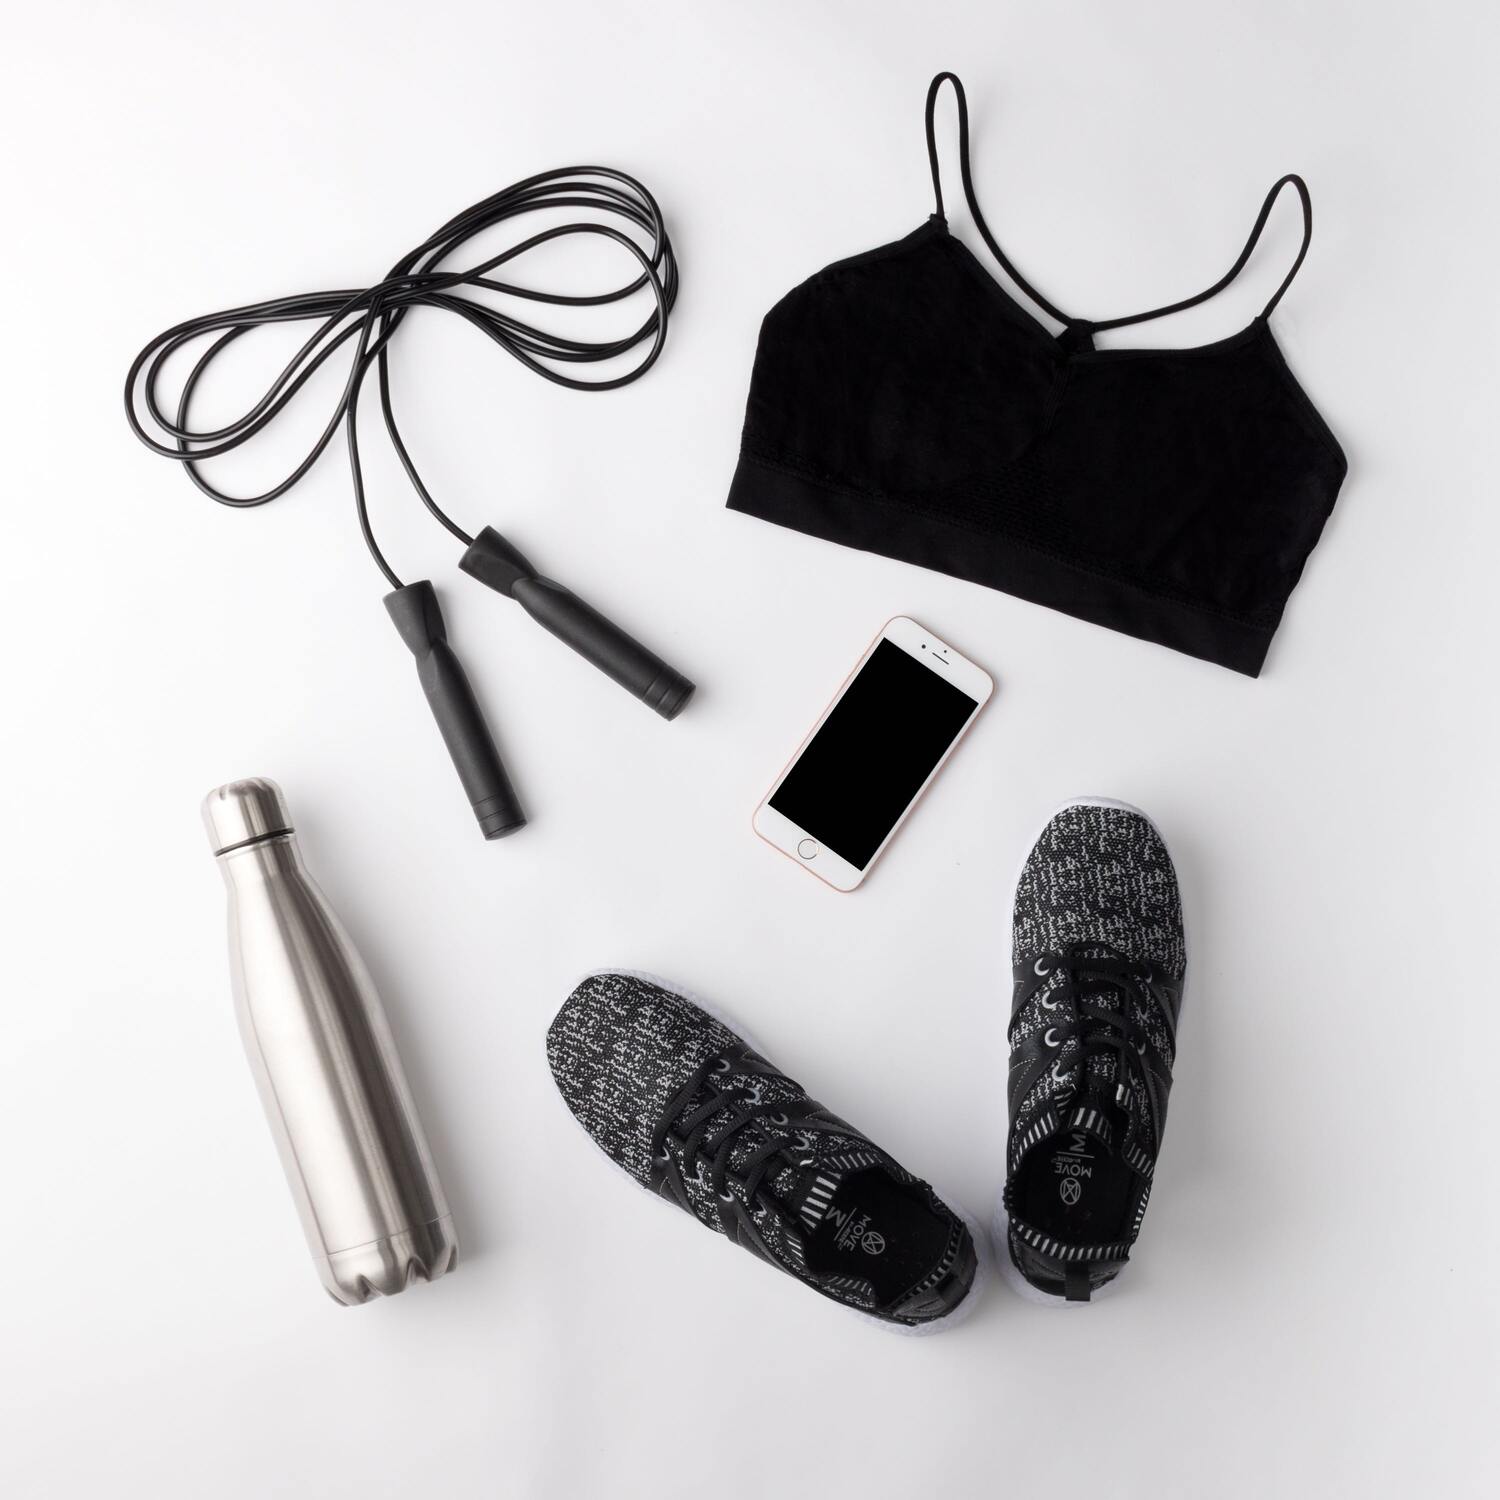 Fitness products